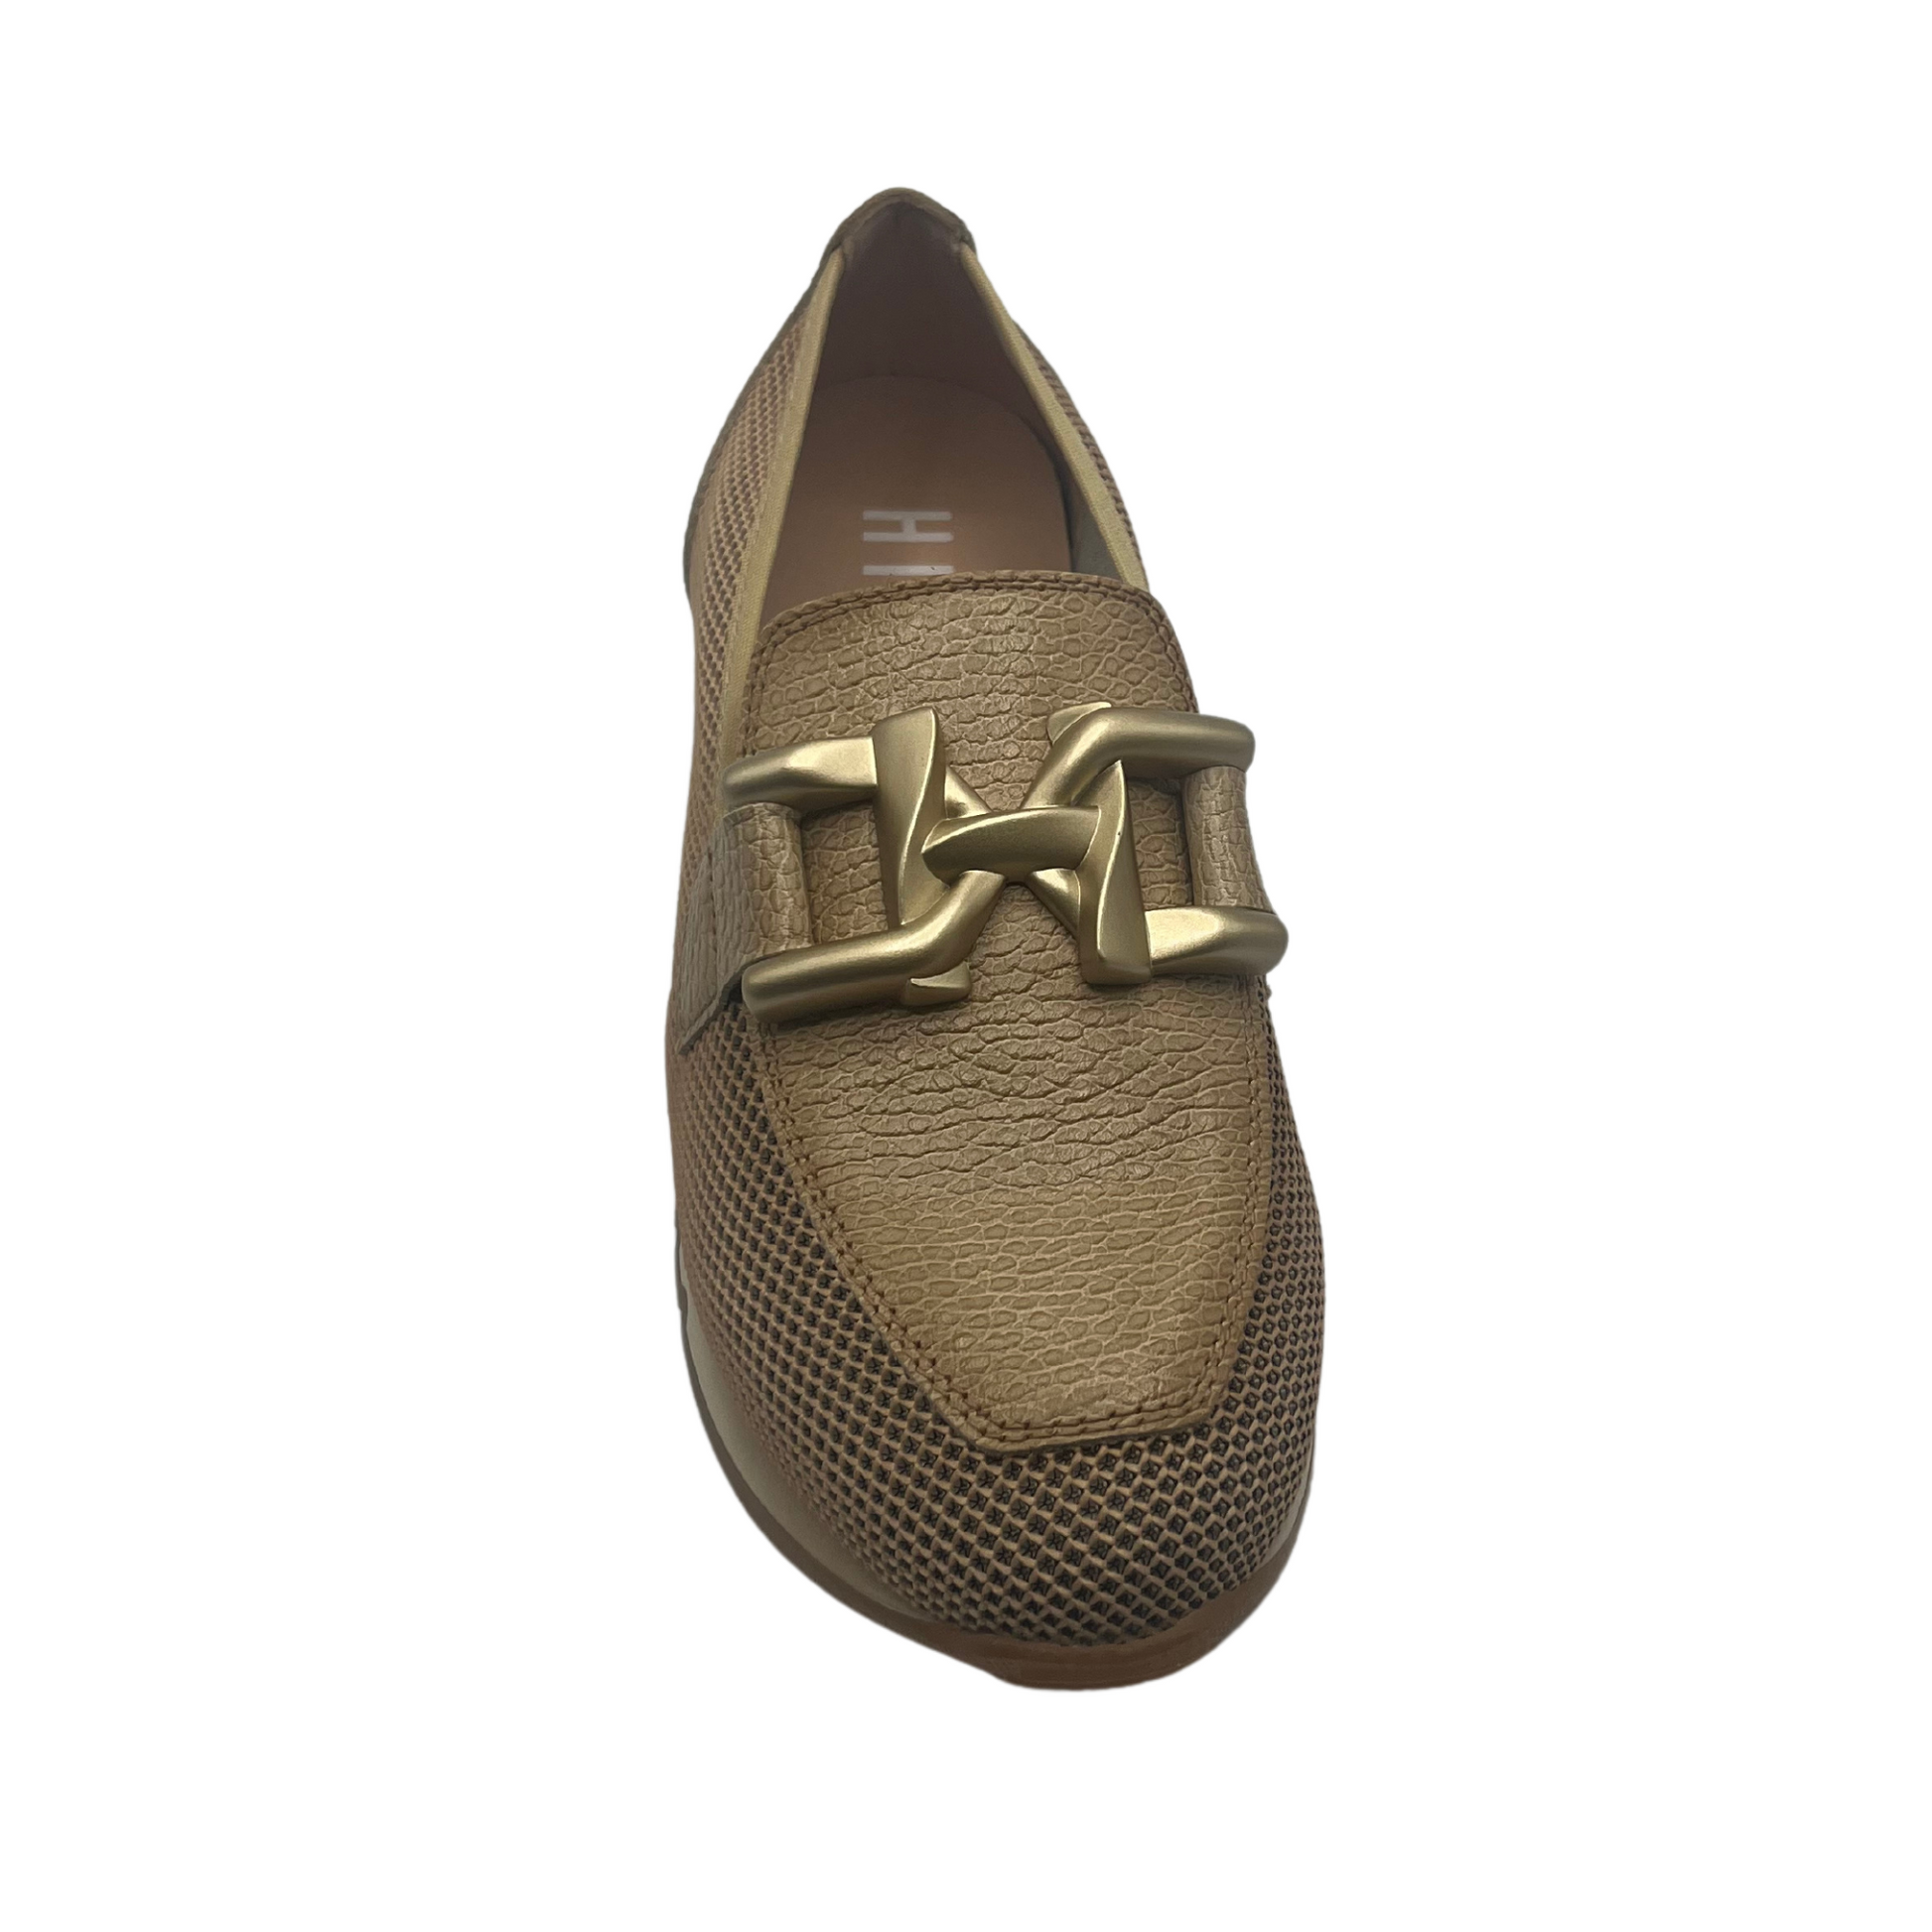 Top view of sand coloured loafer sneaker with mesh sides, white rubber sole and gold detail on upper